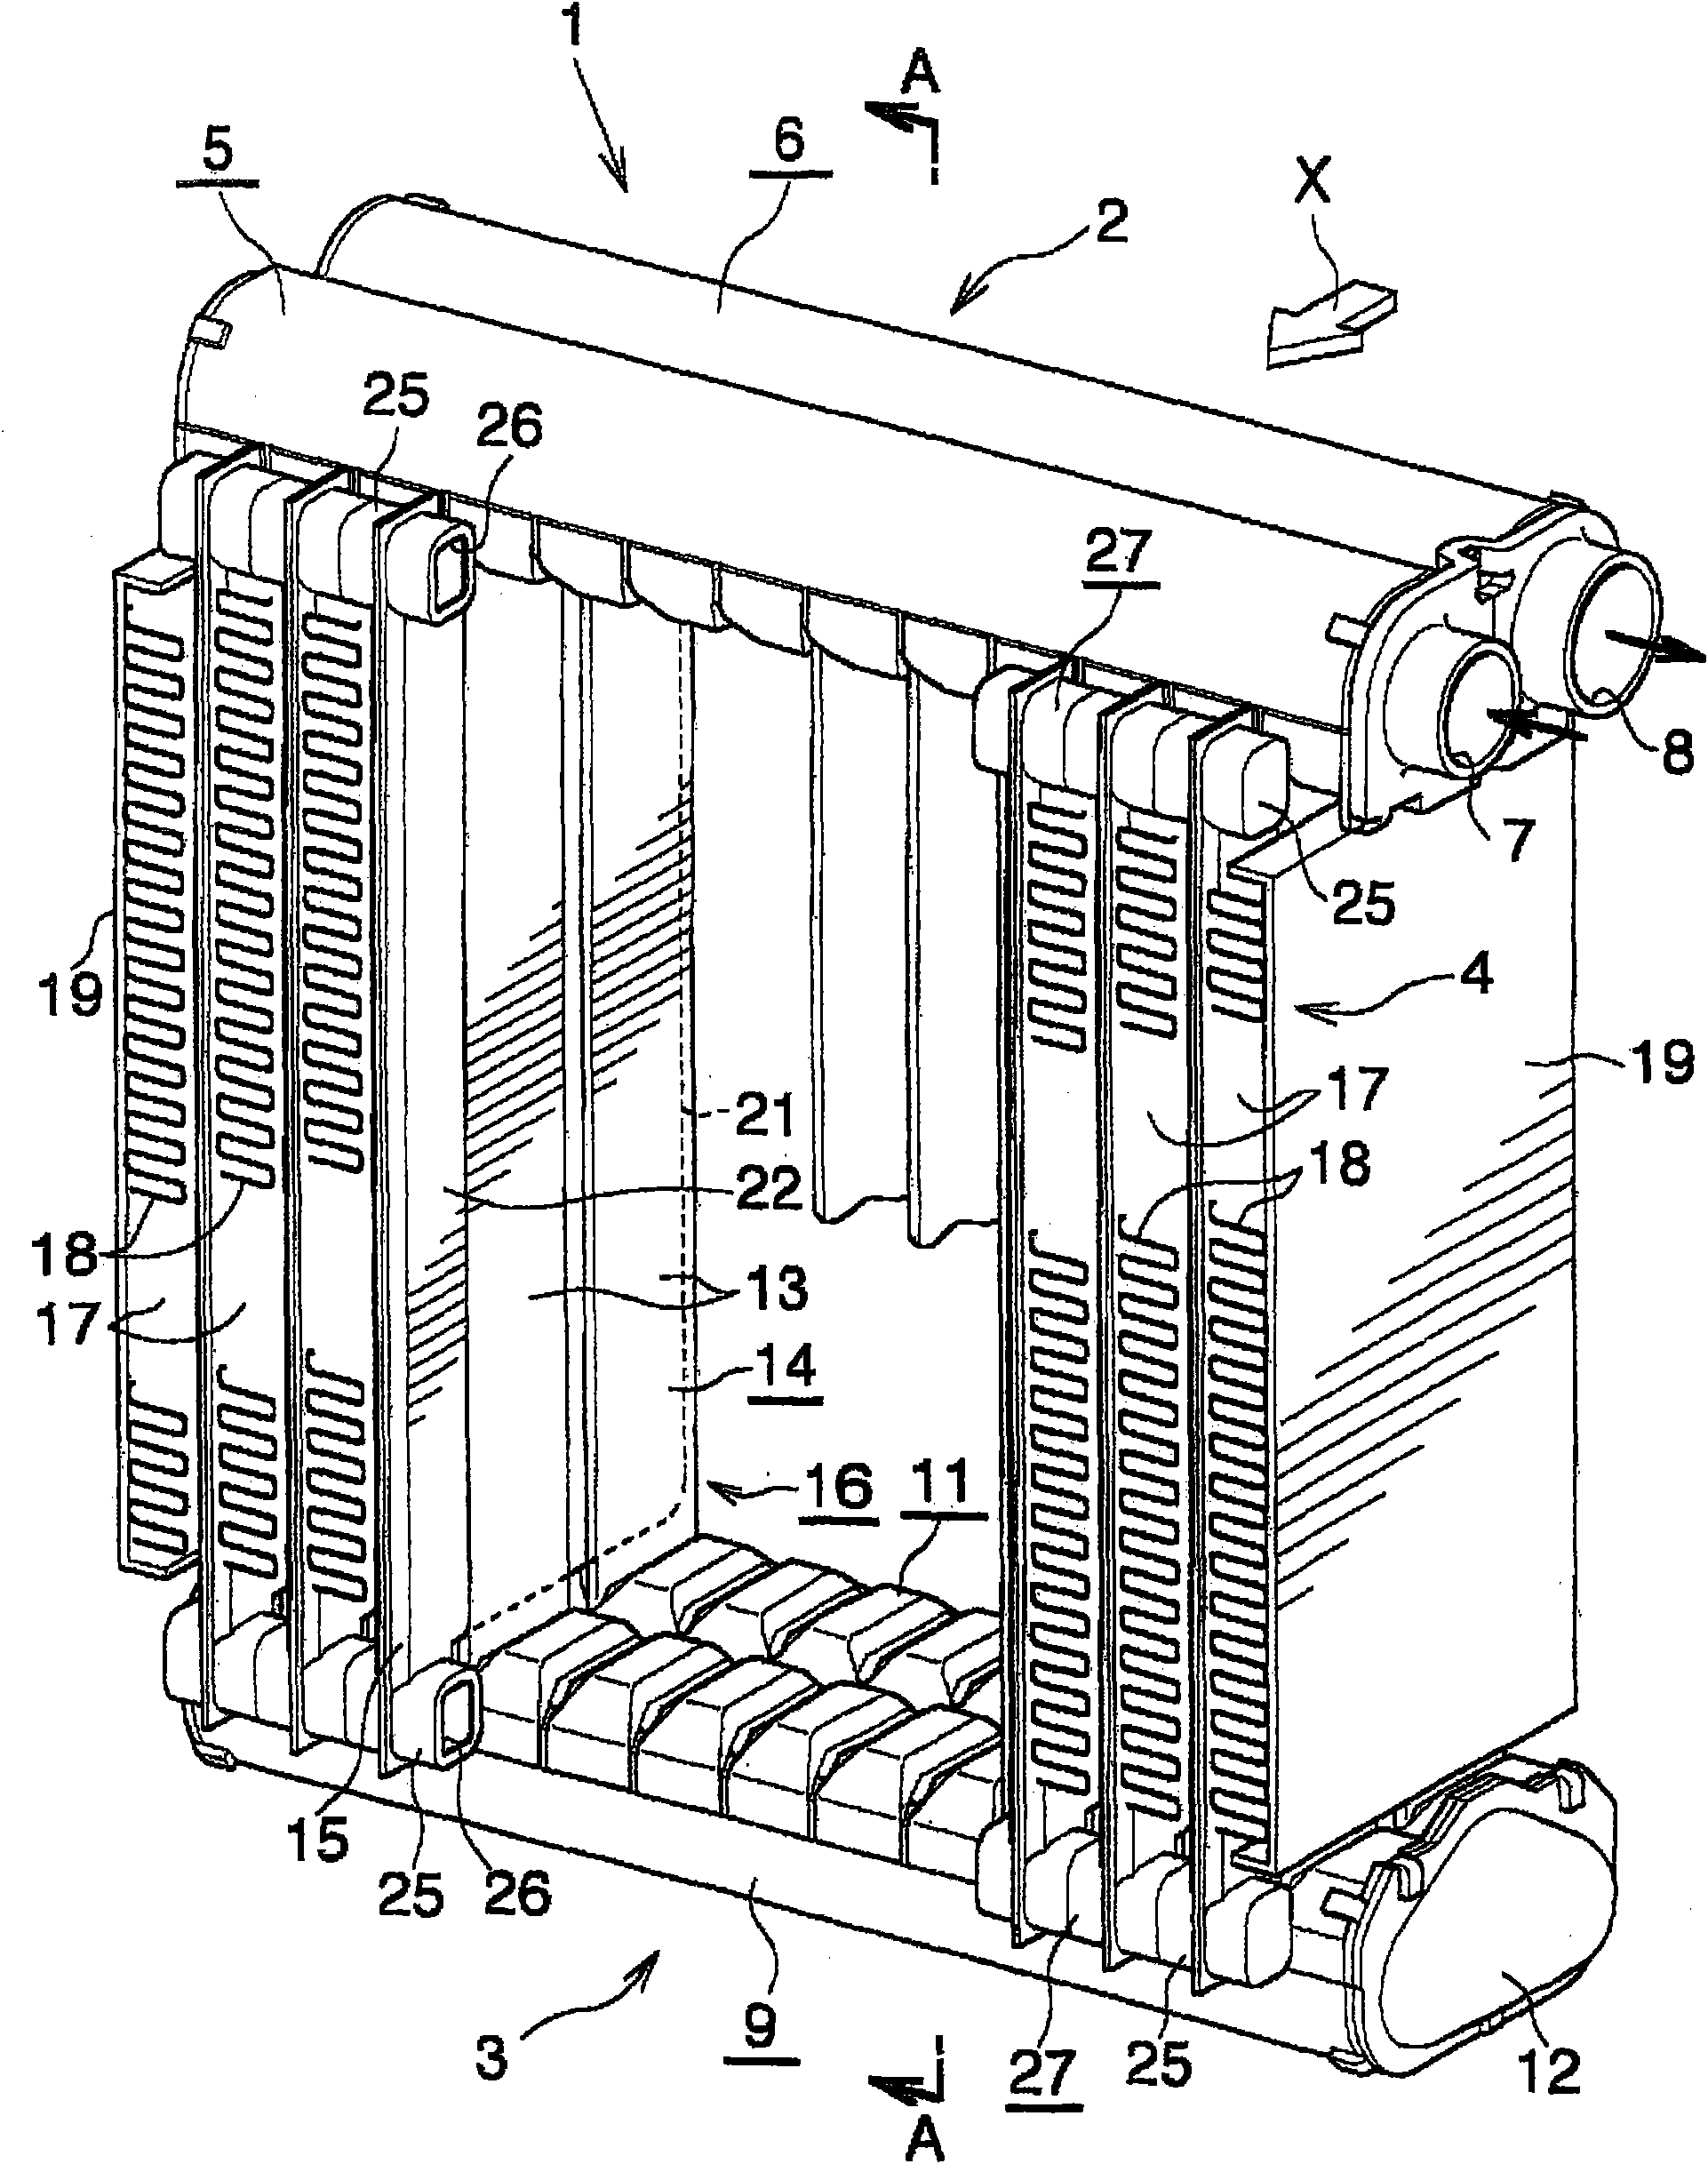 Evaporator with cool storage function